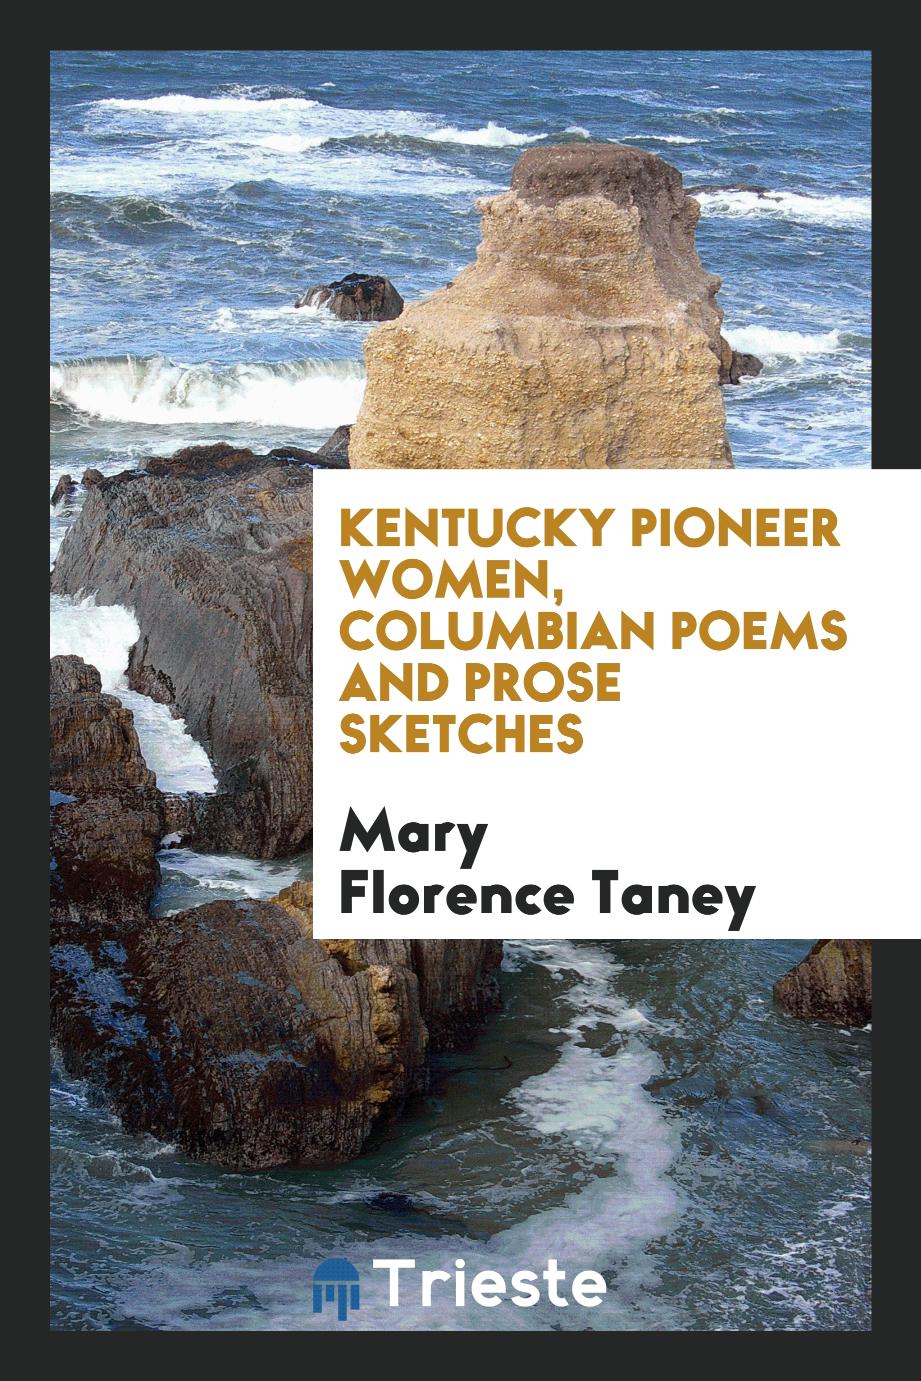 Kentucky pioneer women, Columbian poems and prose sketches